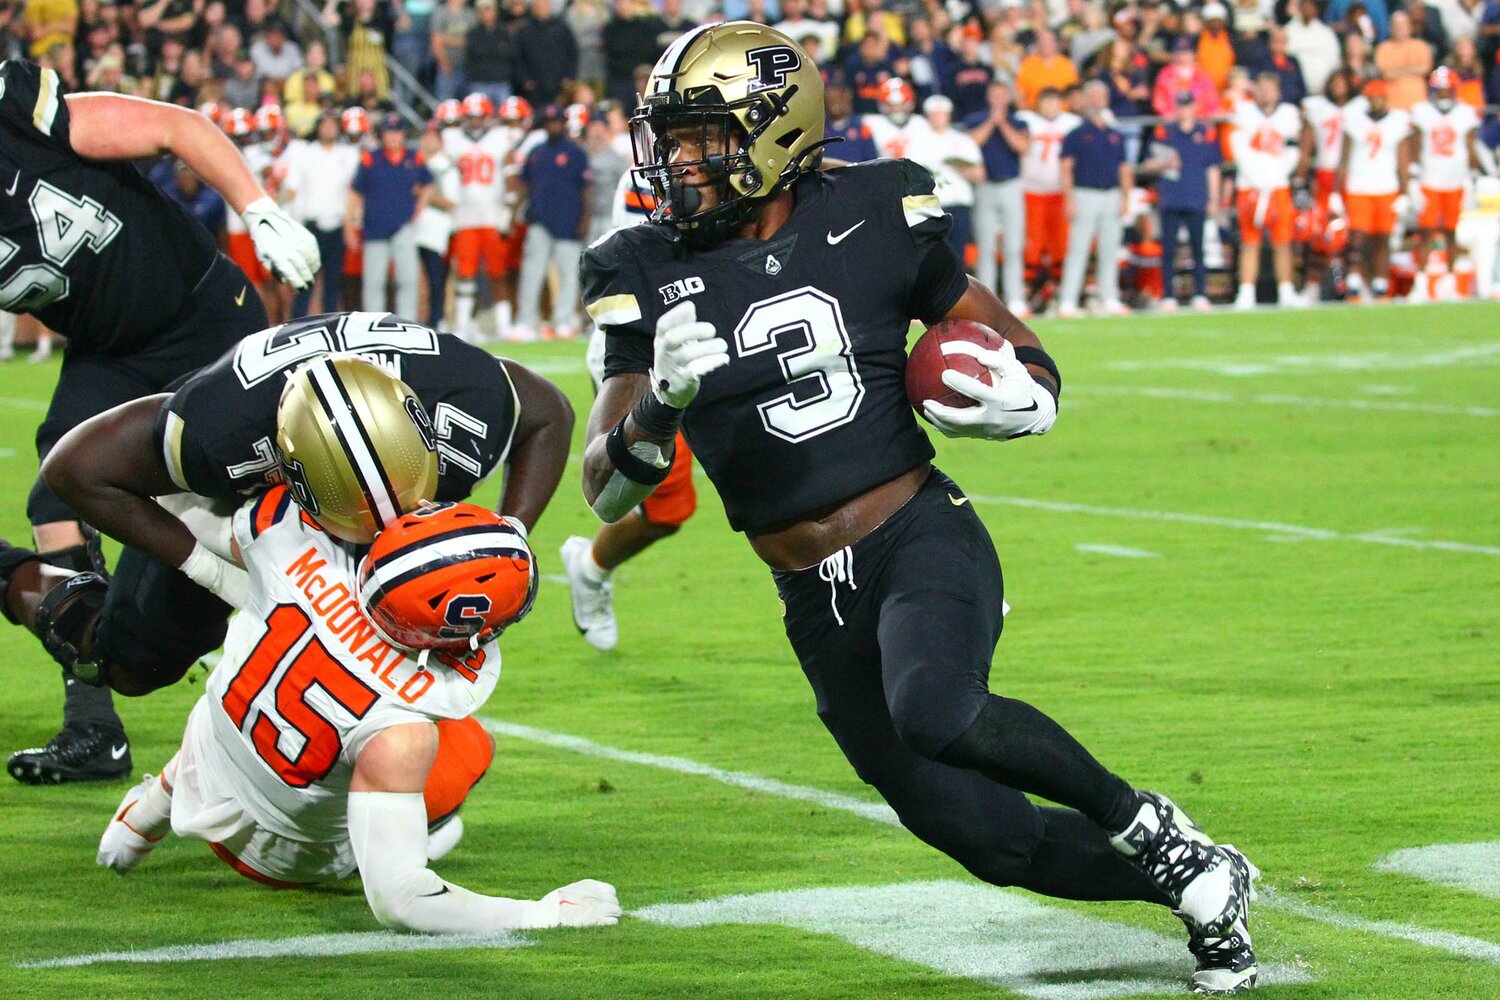 Tyrone Tracy of Purdue - using a block by Mahamane Moussa to gain six yards